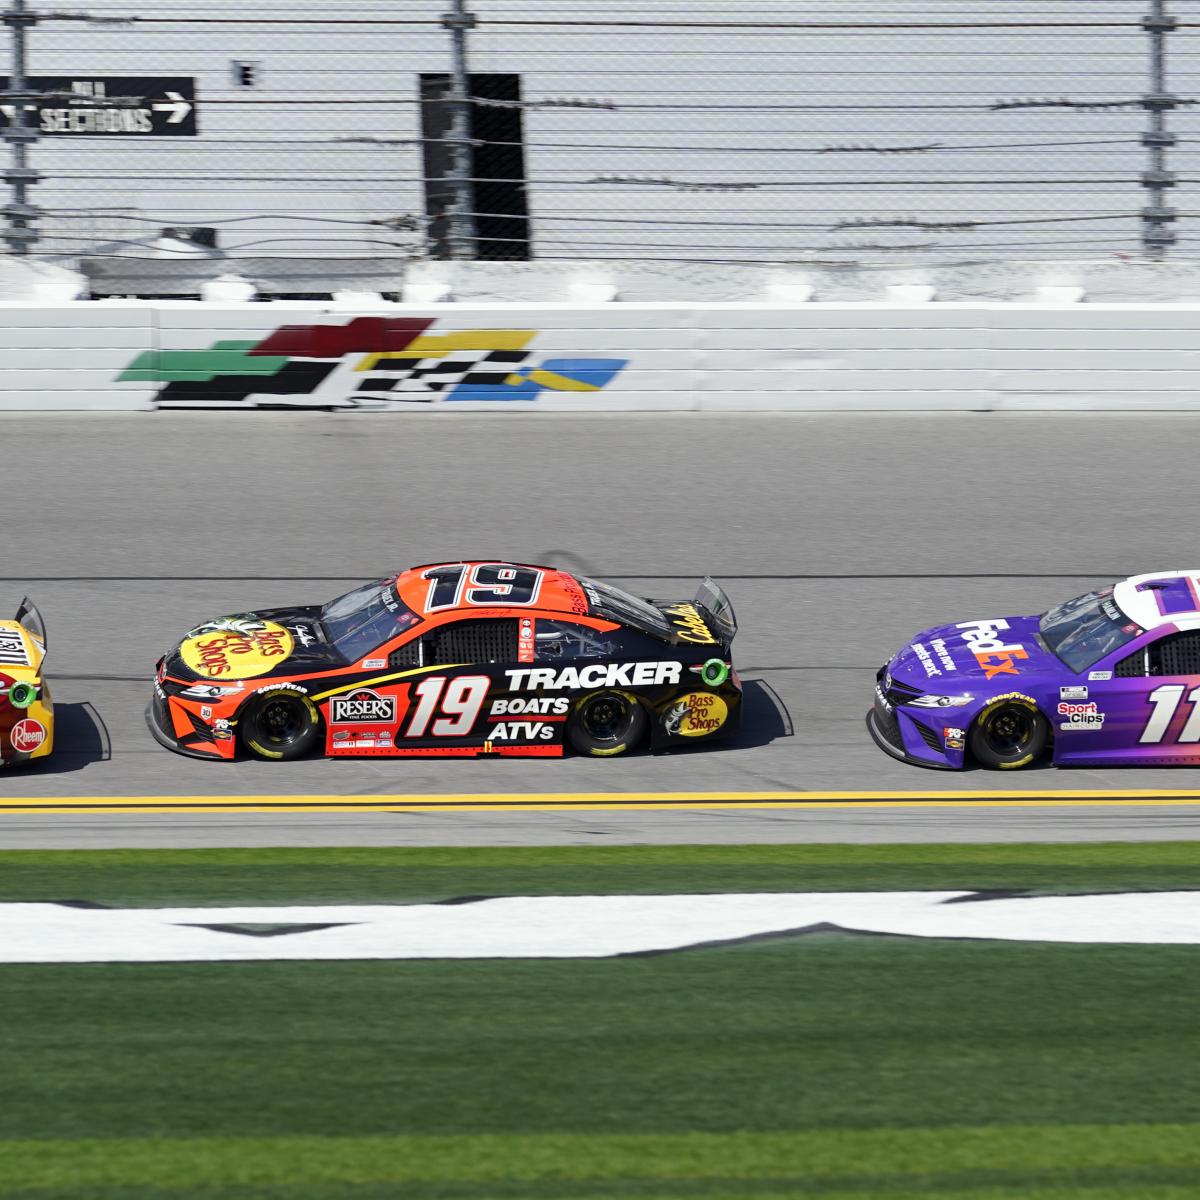 Daytona 500 Schedule 2021: TV Coverage and Schedule for ...